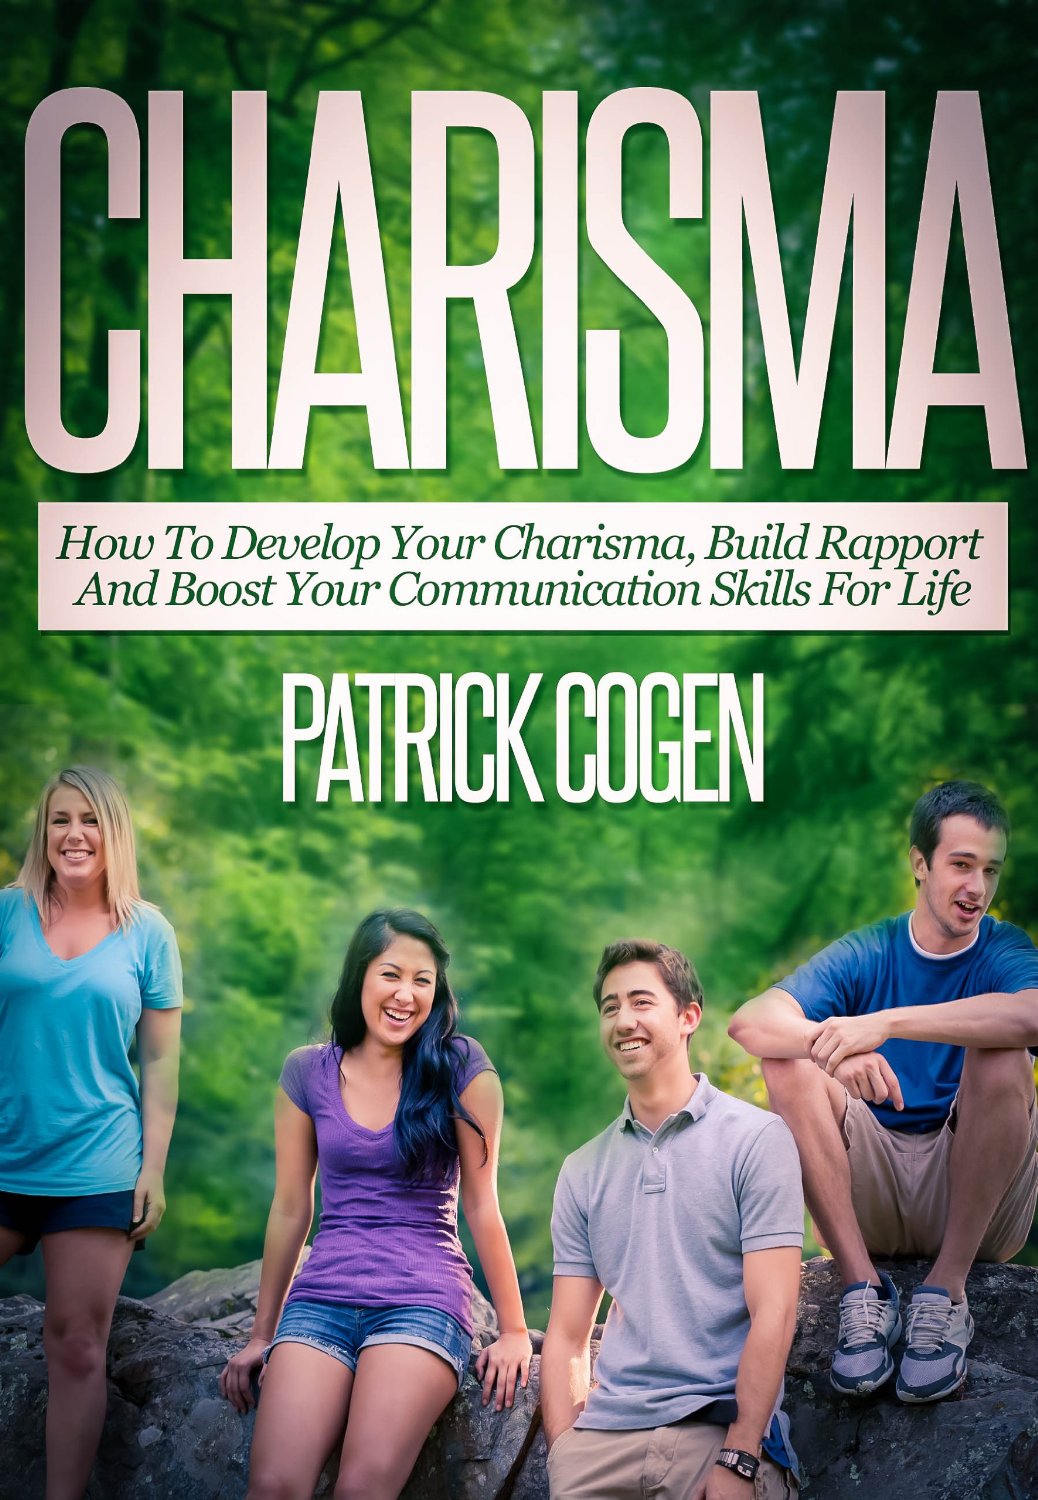 Charisma – How To Develop Your Charisma, Build Rapport And Boost Your Communication Skills For Life by Patrick Cogen